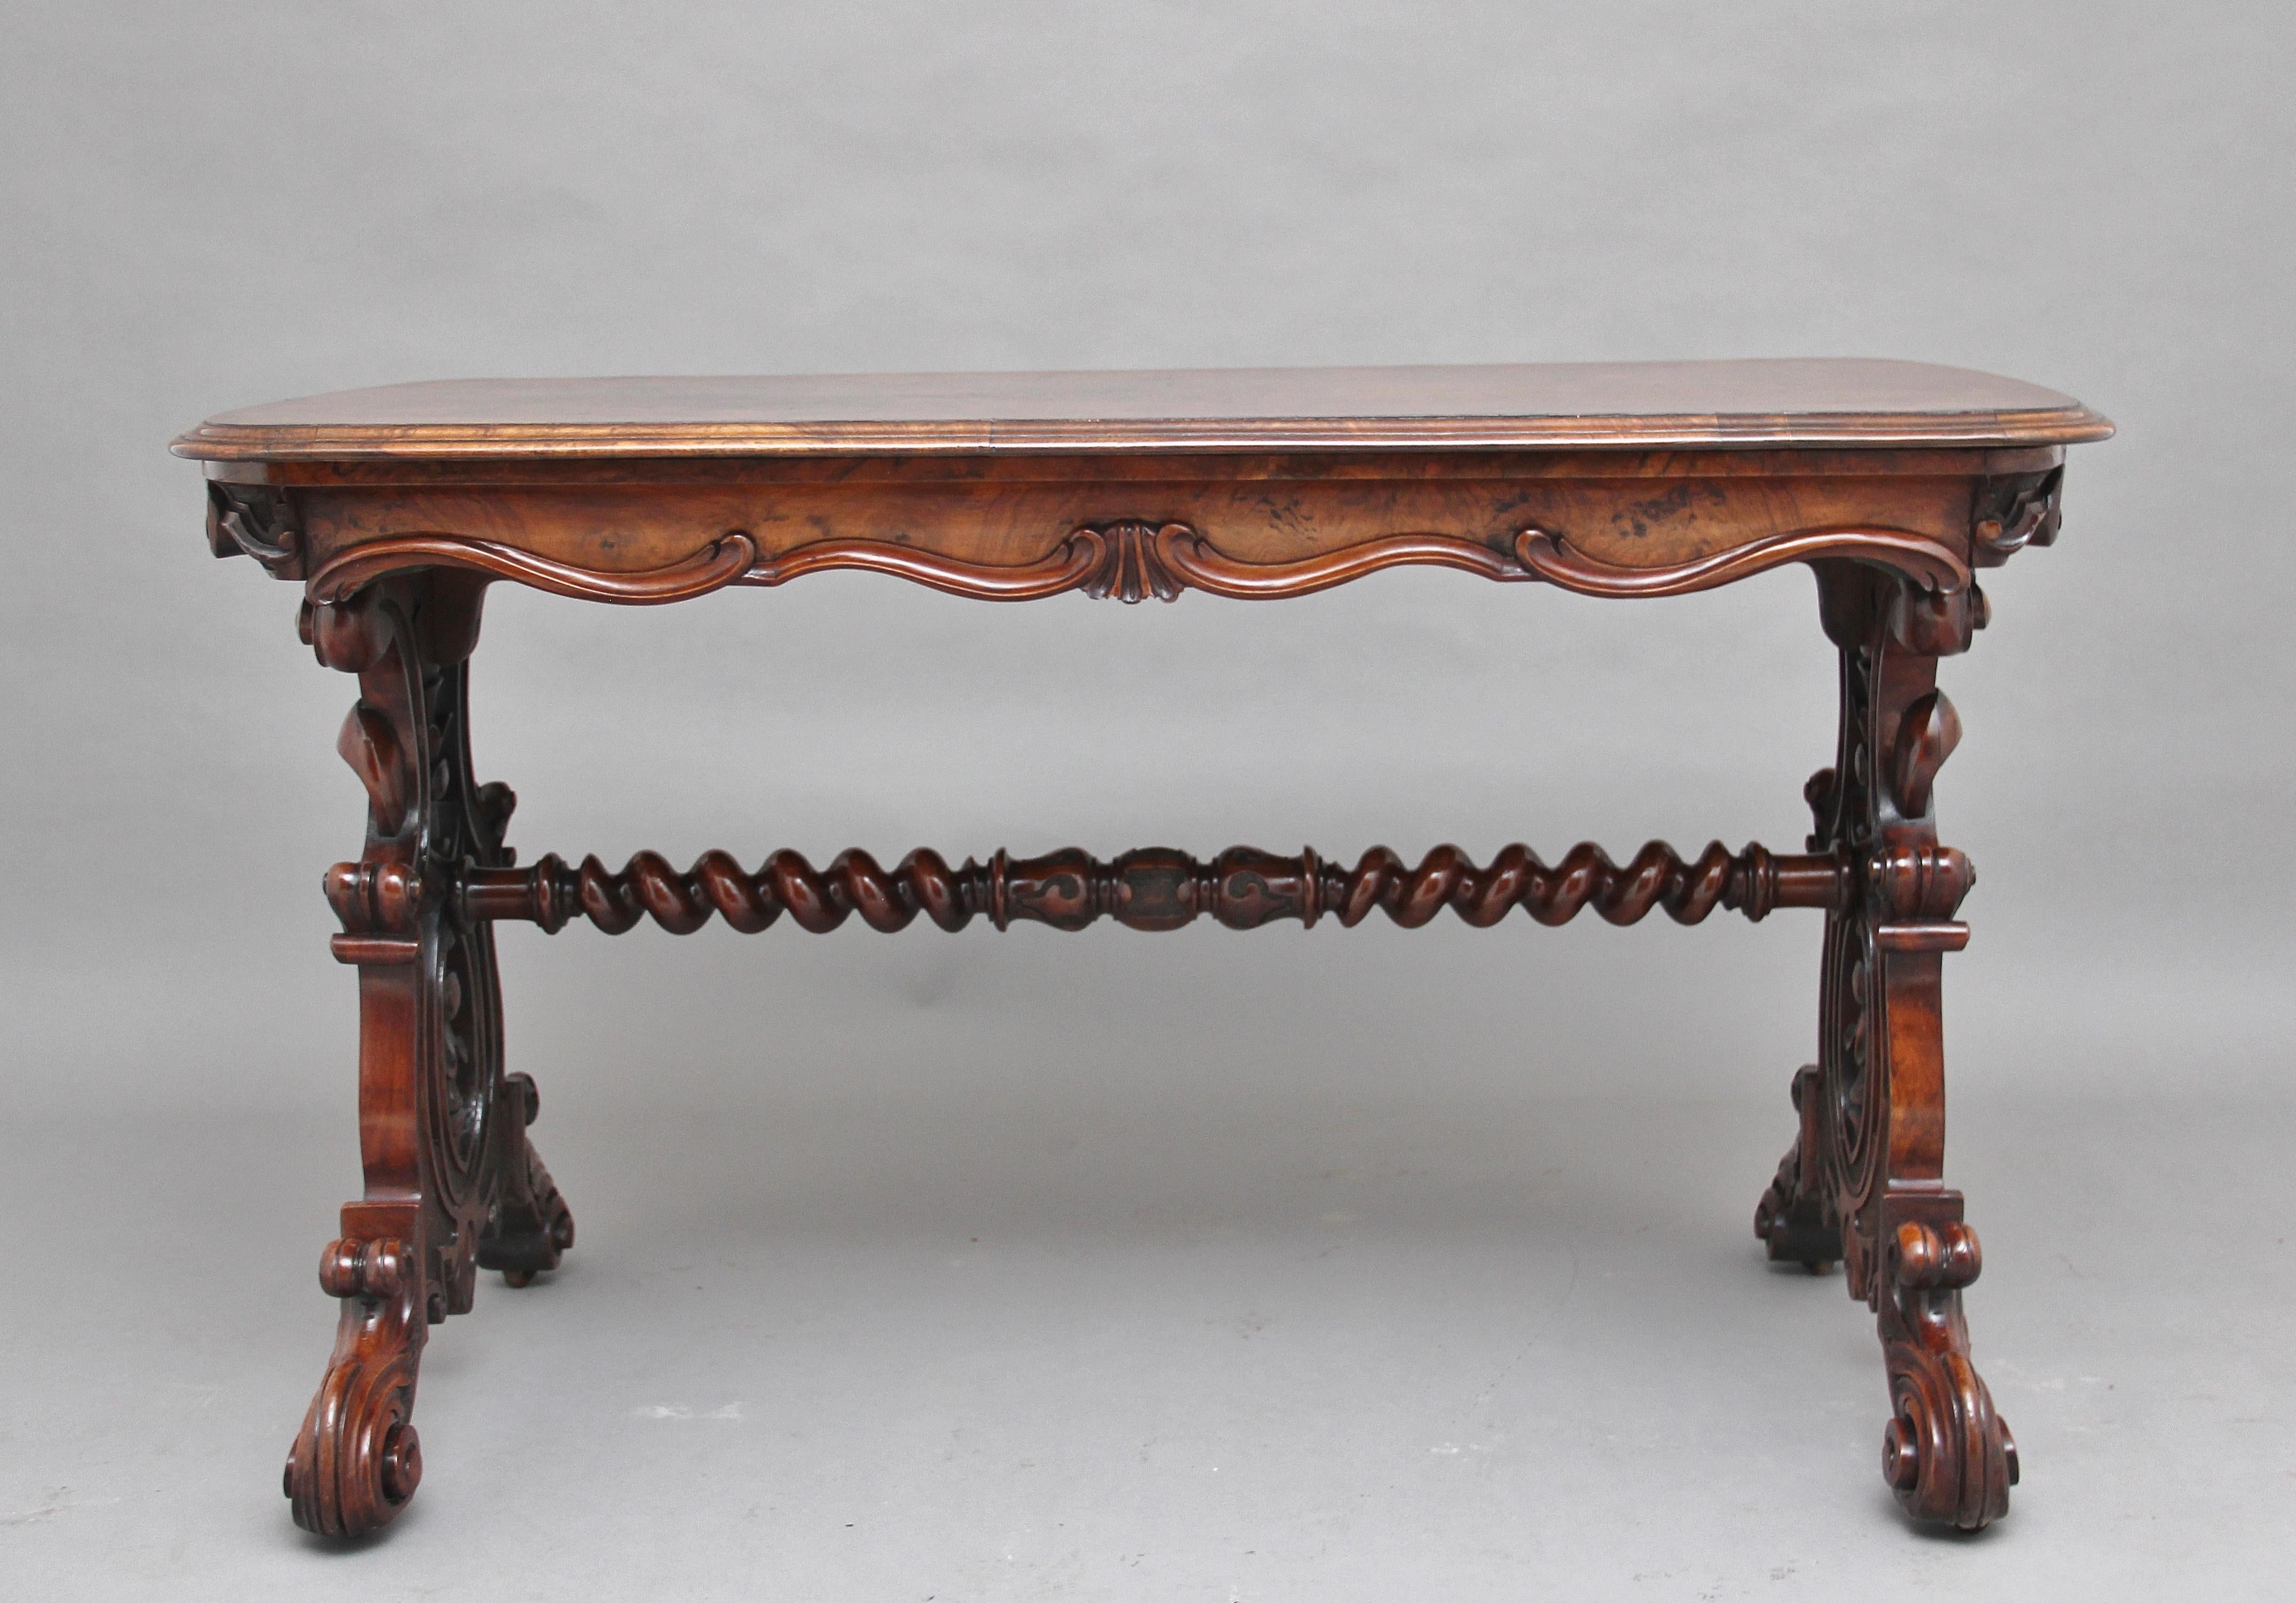 A superb quality 19th century burr walnut centre / stretcher table, having a quarter veneered top with a double moulded edge, the shaped and carved frieze below having lovely bold carving along all sides, supported on lyre end supports with